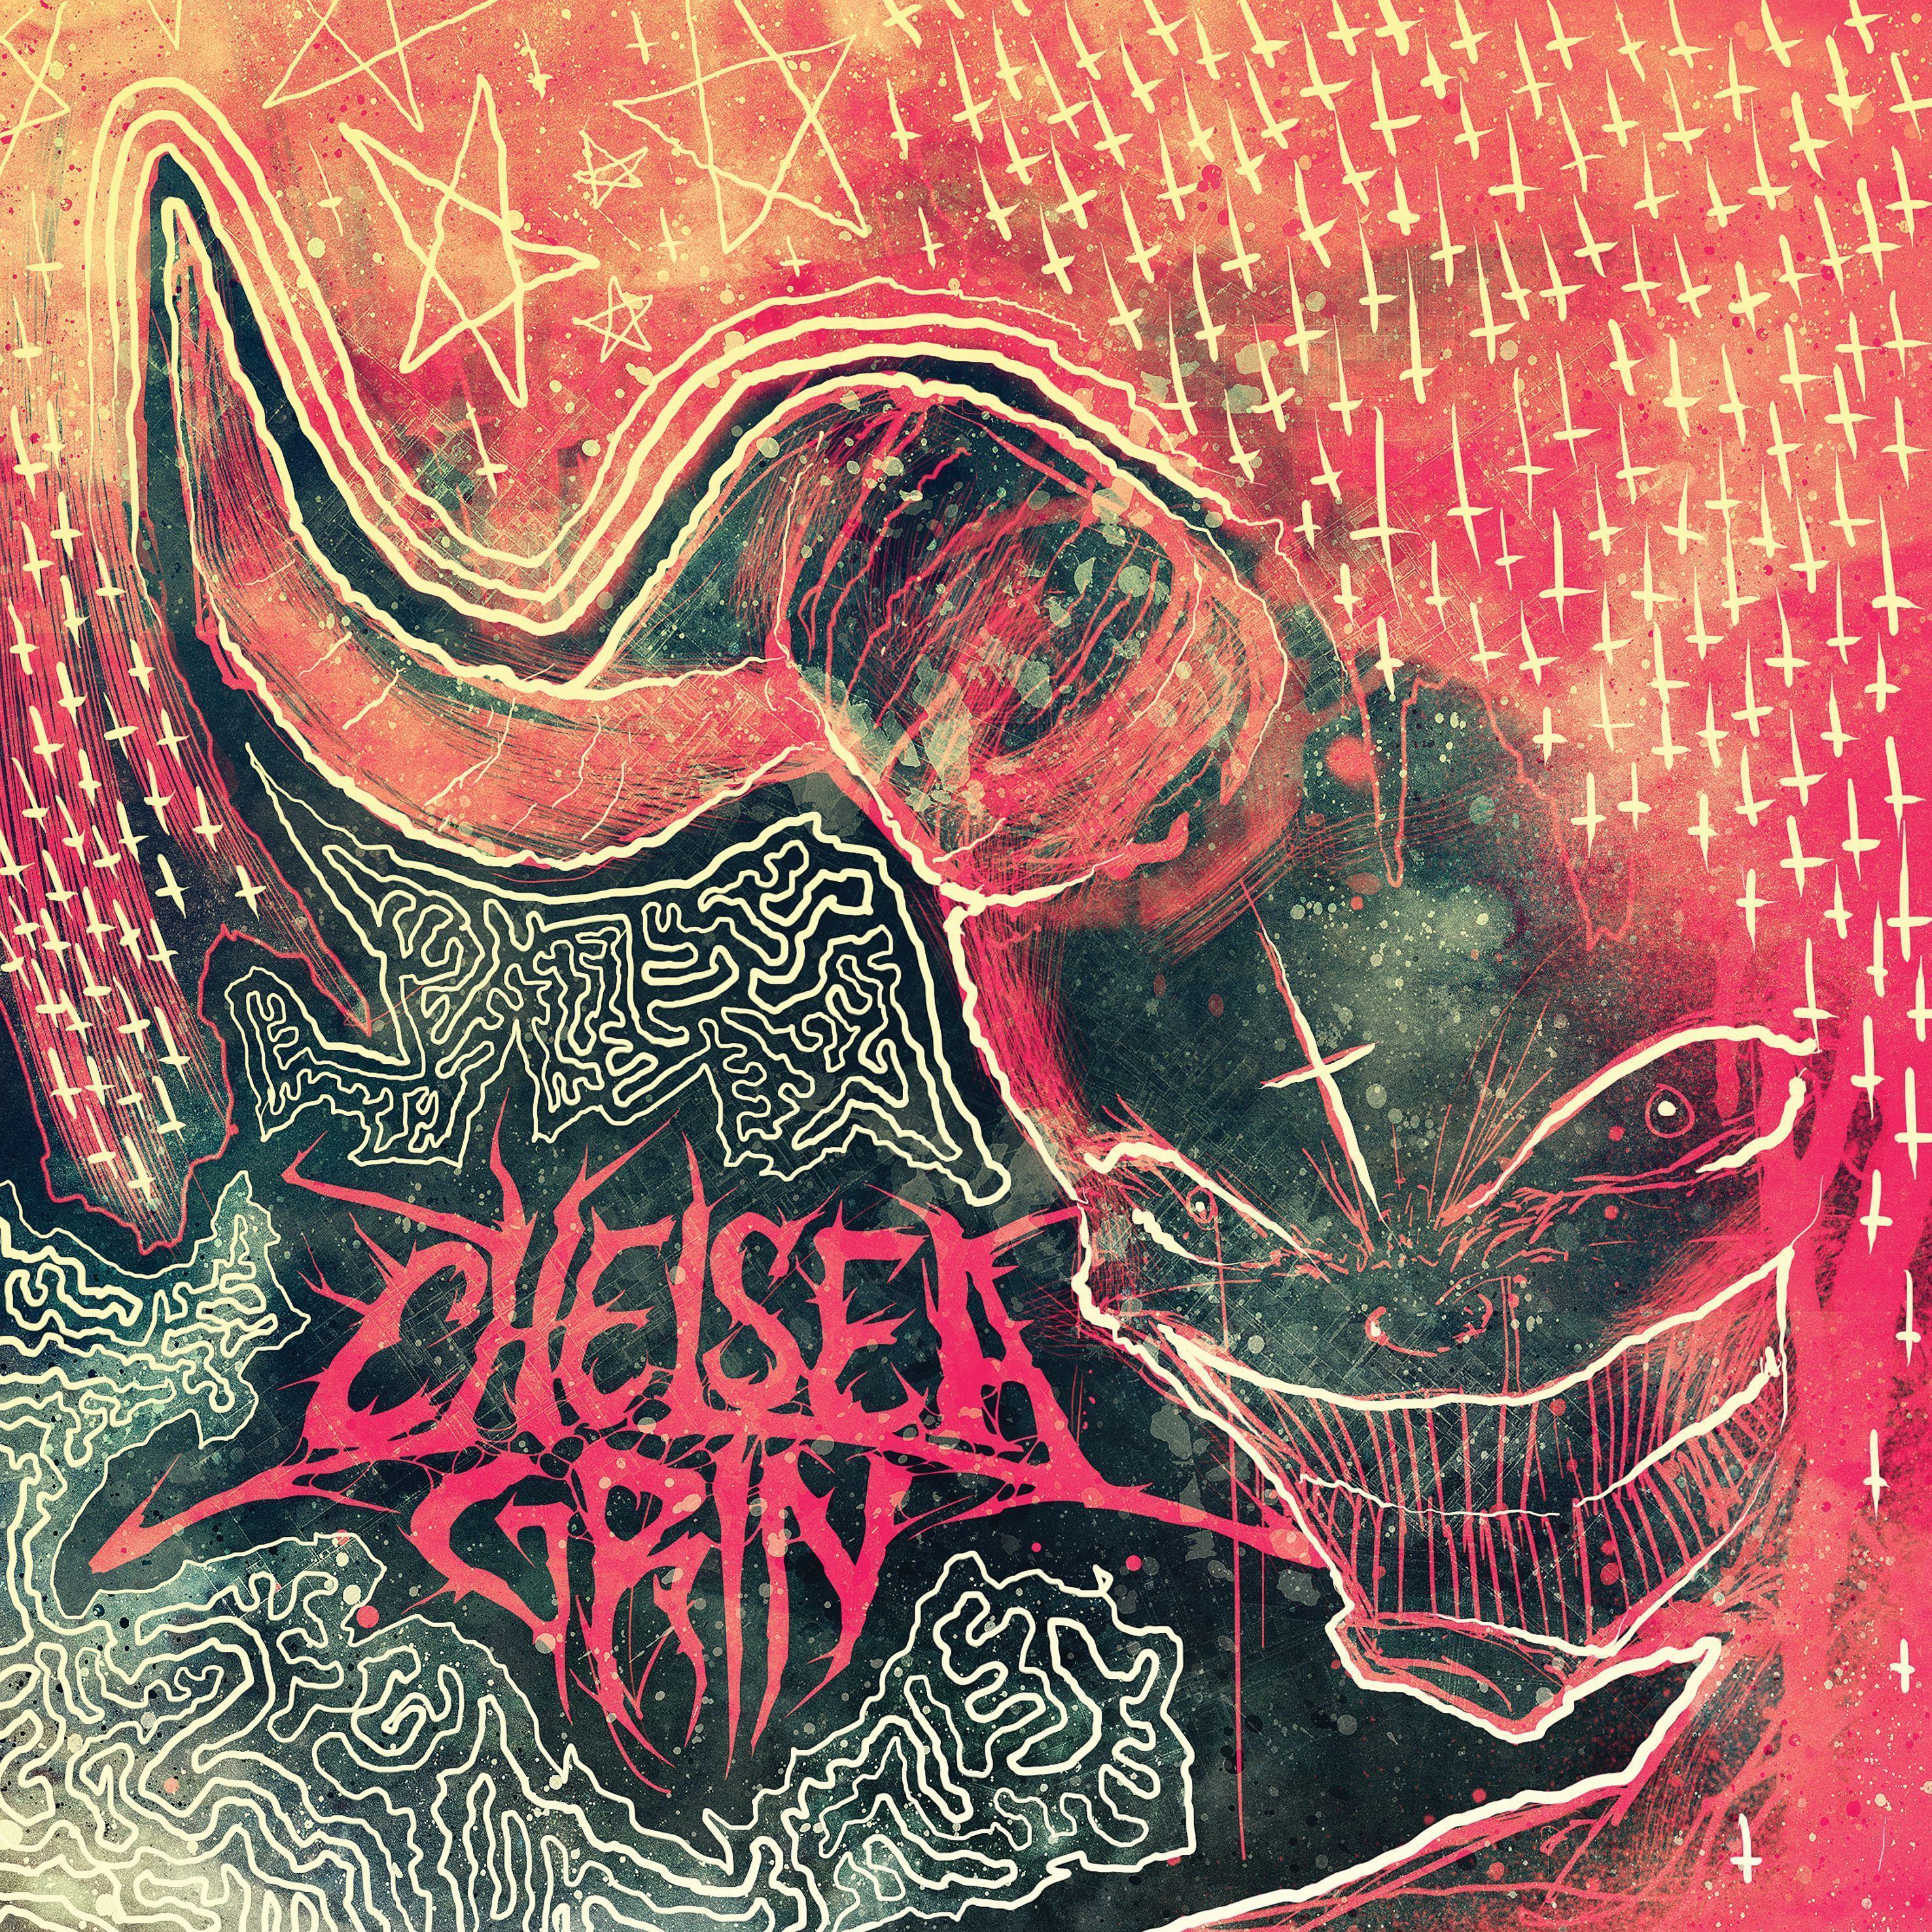 Chelsea Grin HD Wallpaper And Photo download